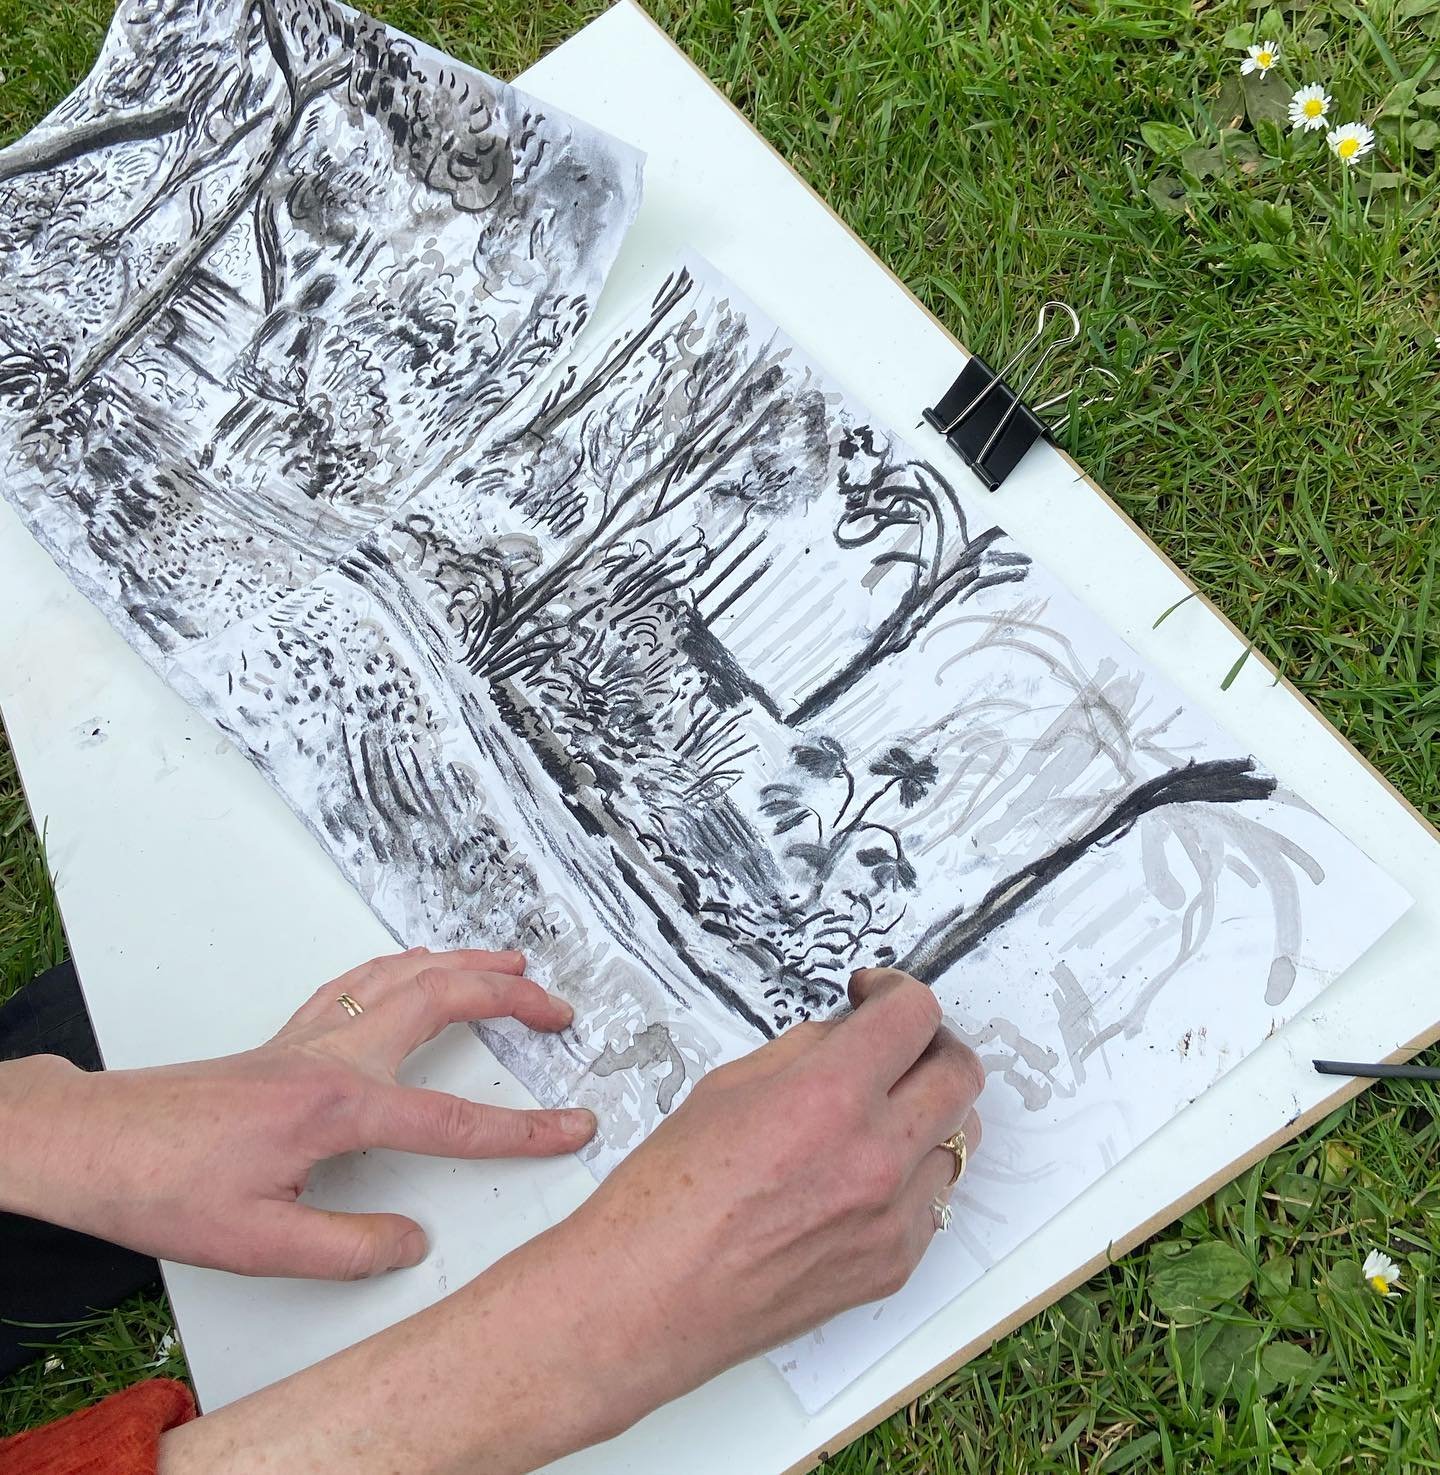 What a brilliant first day of &lsquo;Drawing in the Park, Pattern &amp; People&rsquo; @westdeancollege
It was an absolute joy to get outside and draw in Tavistock Gardens. Can&rsquo;t wait for tomorrow 💫